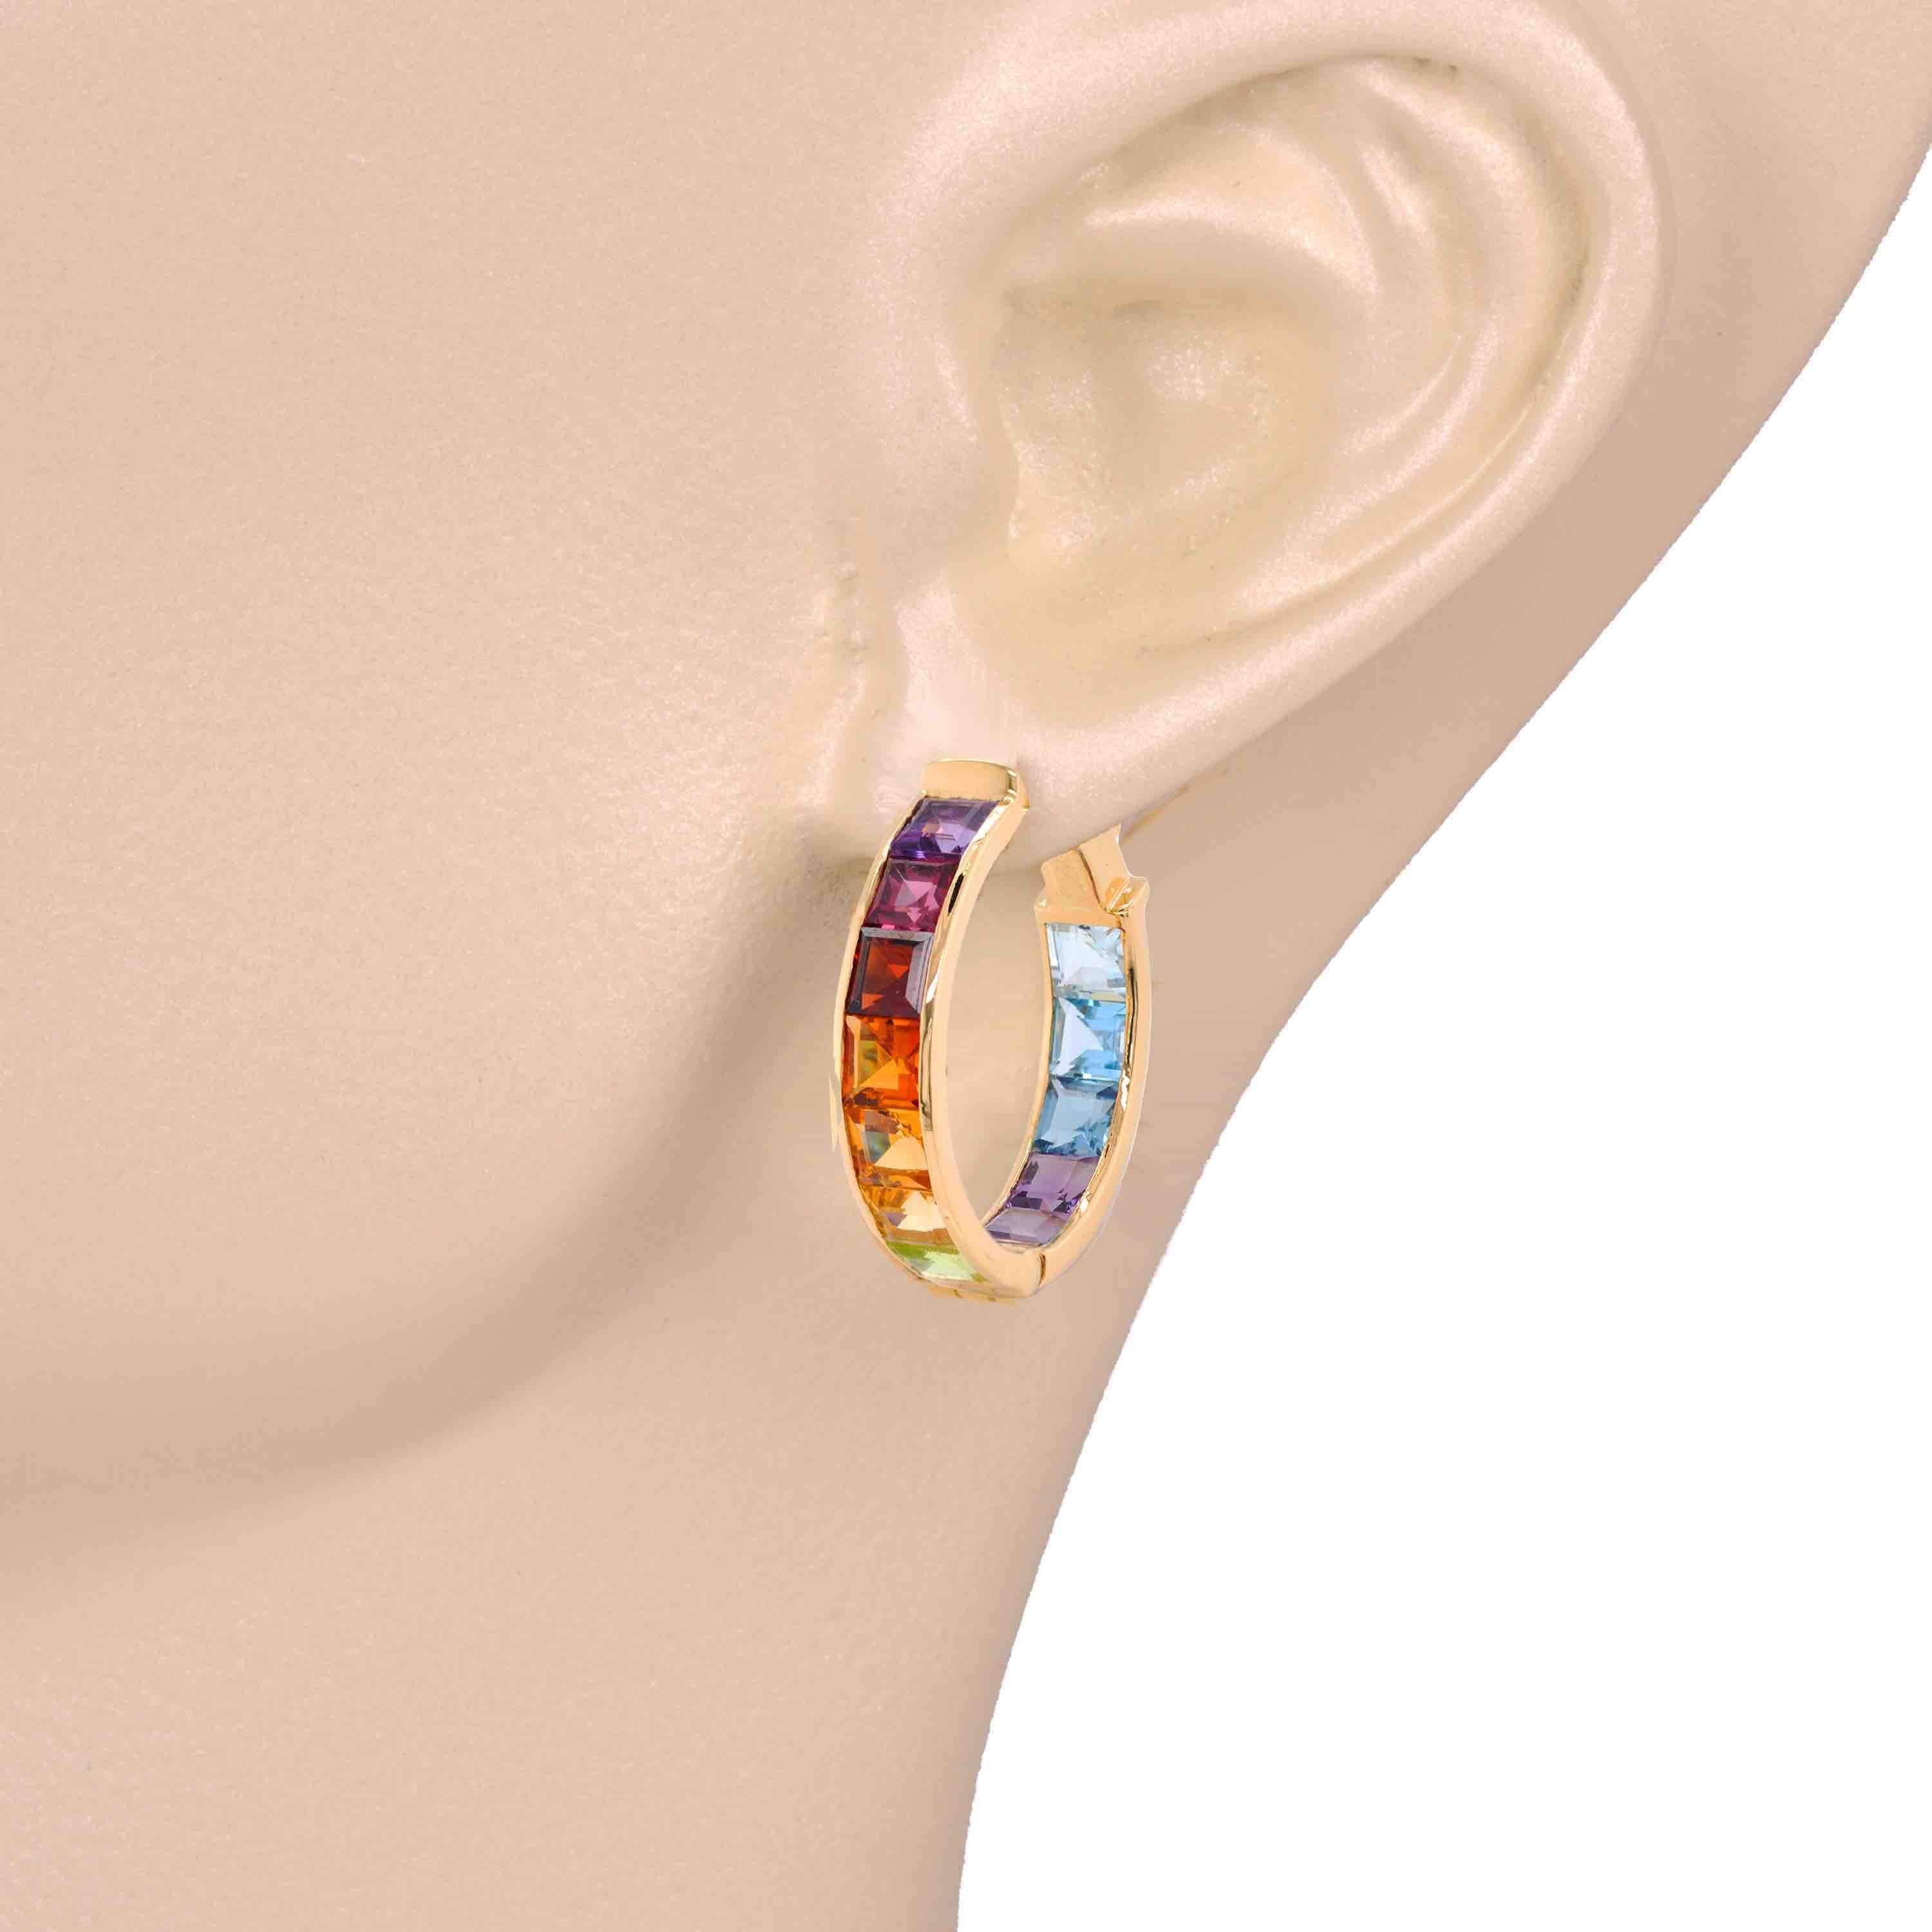 Presenting the 18 karat yellow gold multi-color rainbow channel set hoop earrings – a blend of contemporary elegance with playful charm. These earrings feature a sleek hoop design adorned with carefully arranged multicolored gemstones set securely